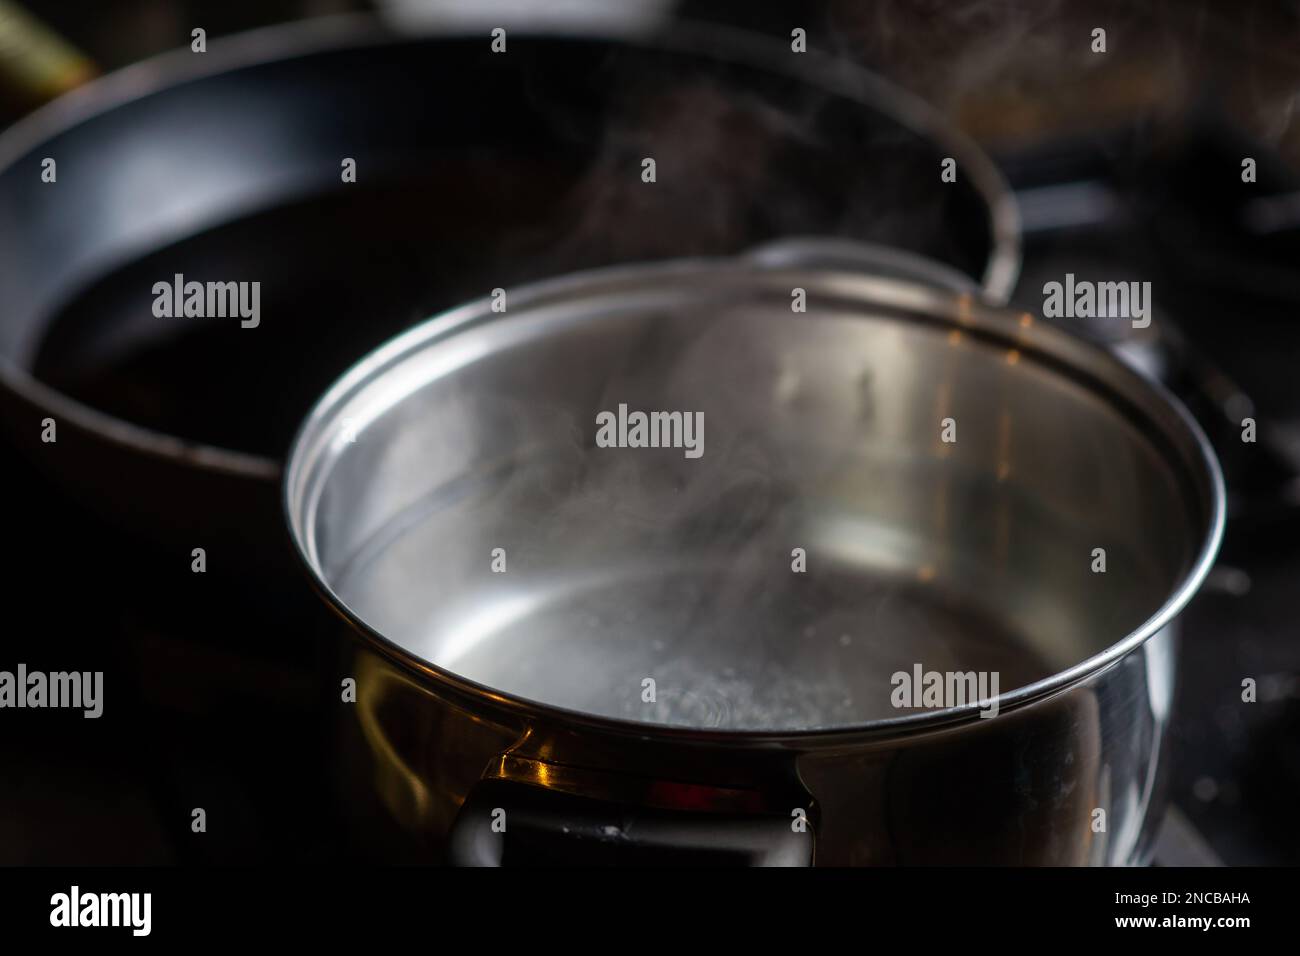 https://c8.alamy.com/comp/2NCBAHA/a-pot-of-boiling-water-on-a-kitchen-stove-kitchen-utensils-are-nearby-2NCBAHA.jpg